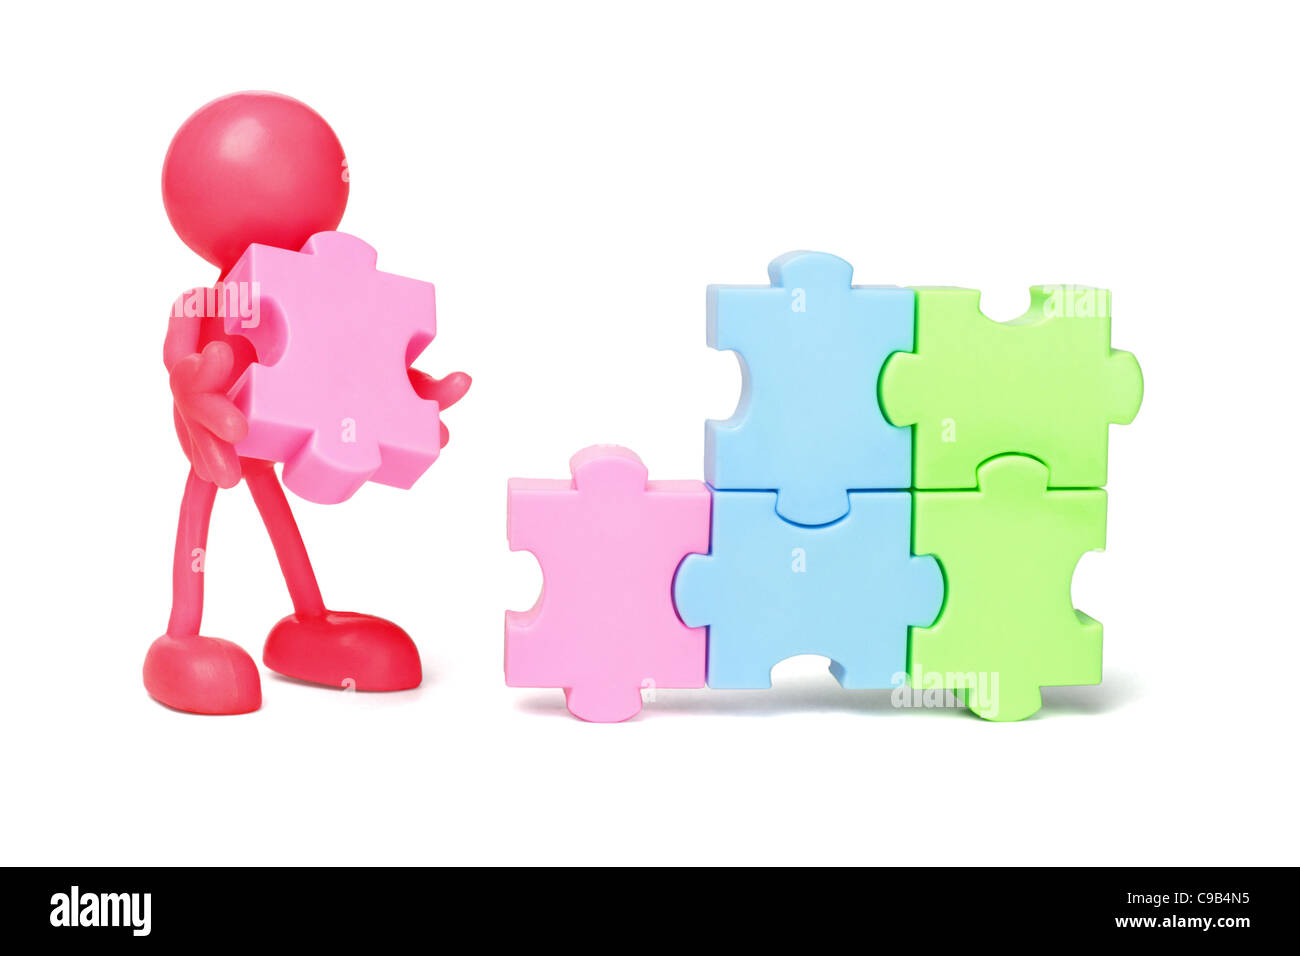 Red faceless figurine working on jigsaw puzzles Stock Photo